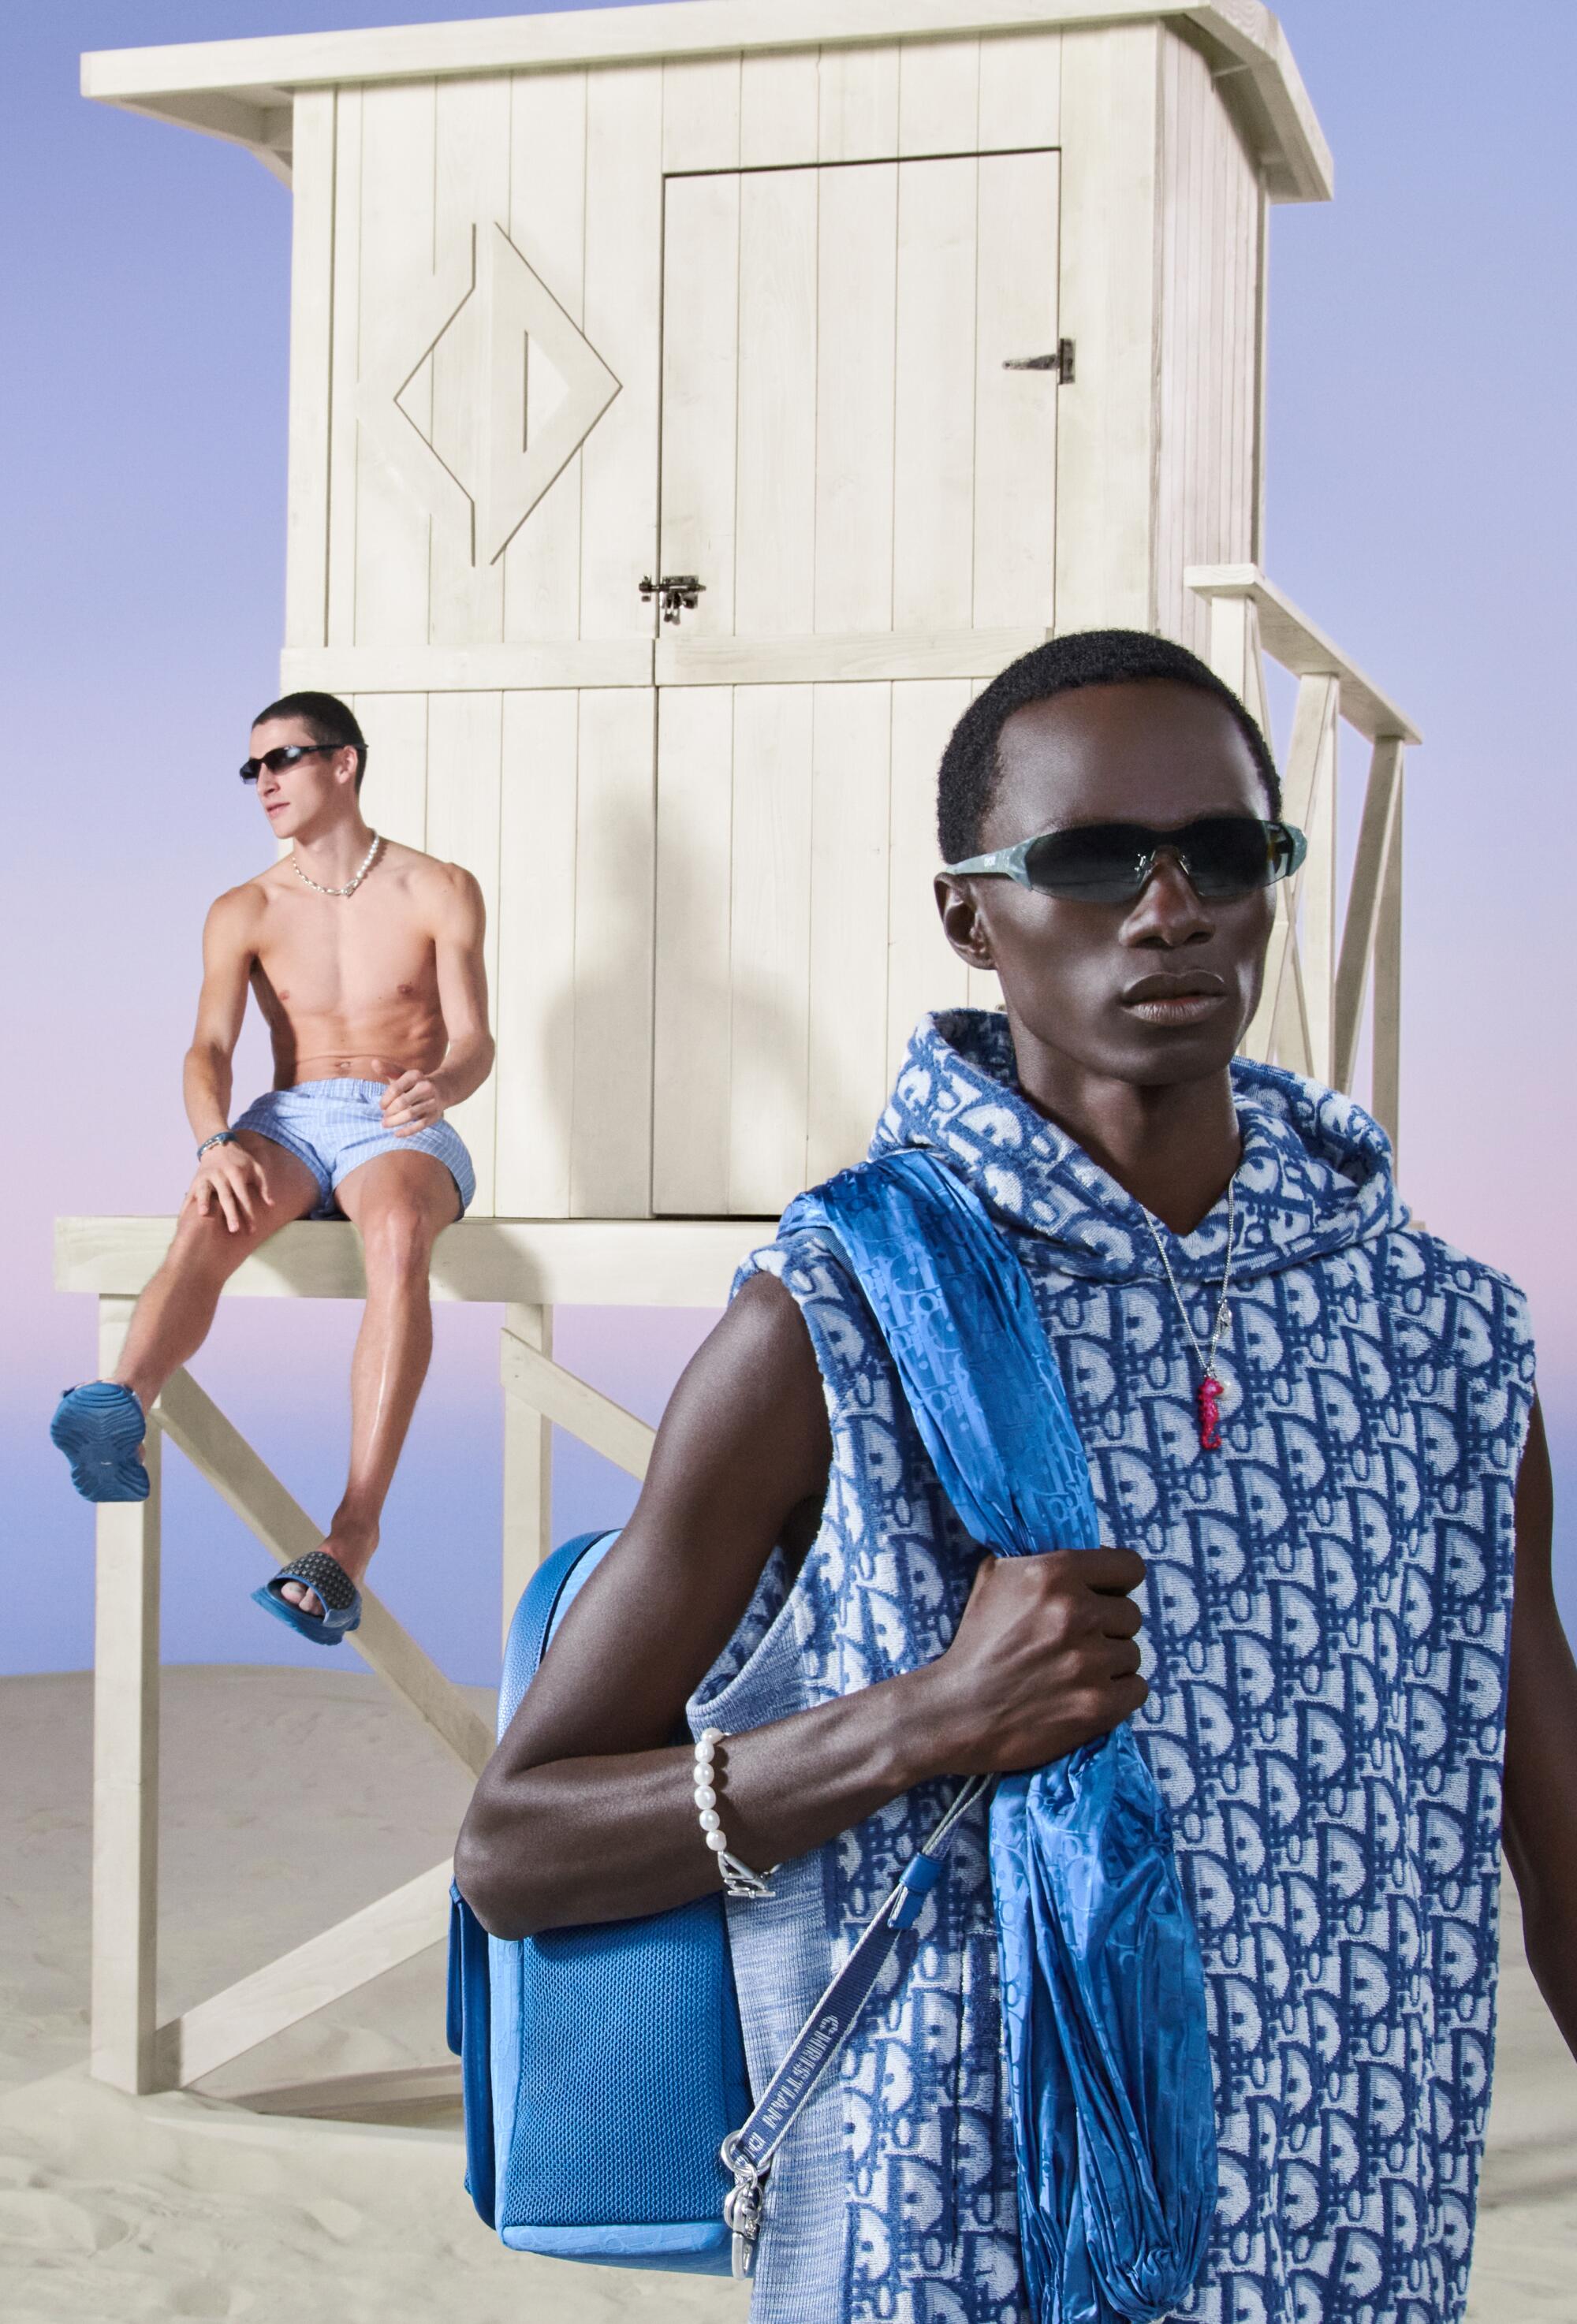 A model in shorts sitting on a lifeguard tower; in the foreground a model in a blue sleeveless hoodie with a blue towel